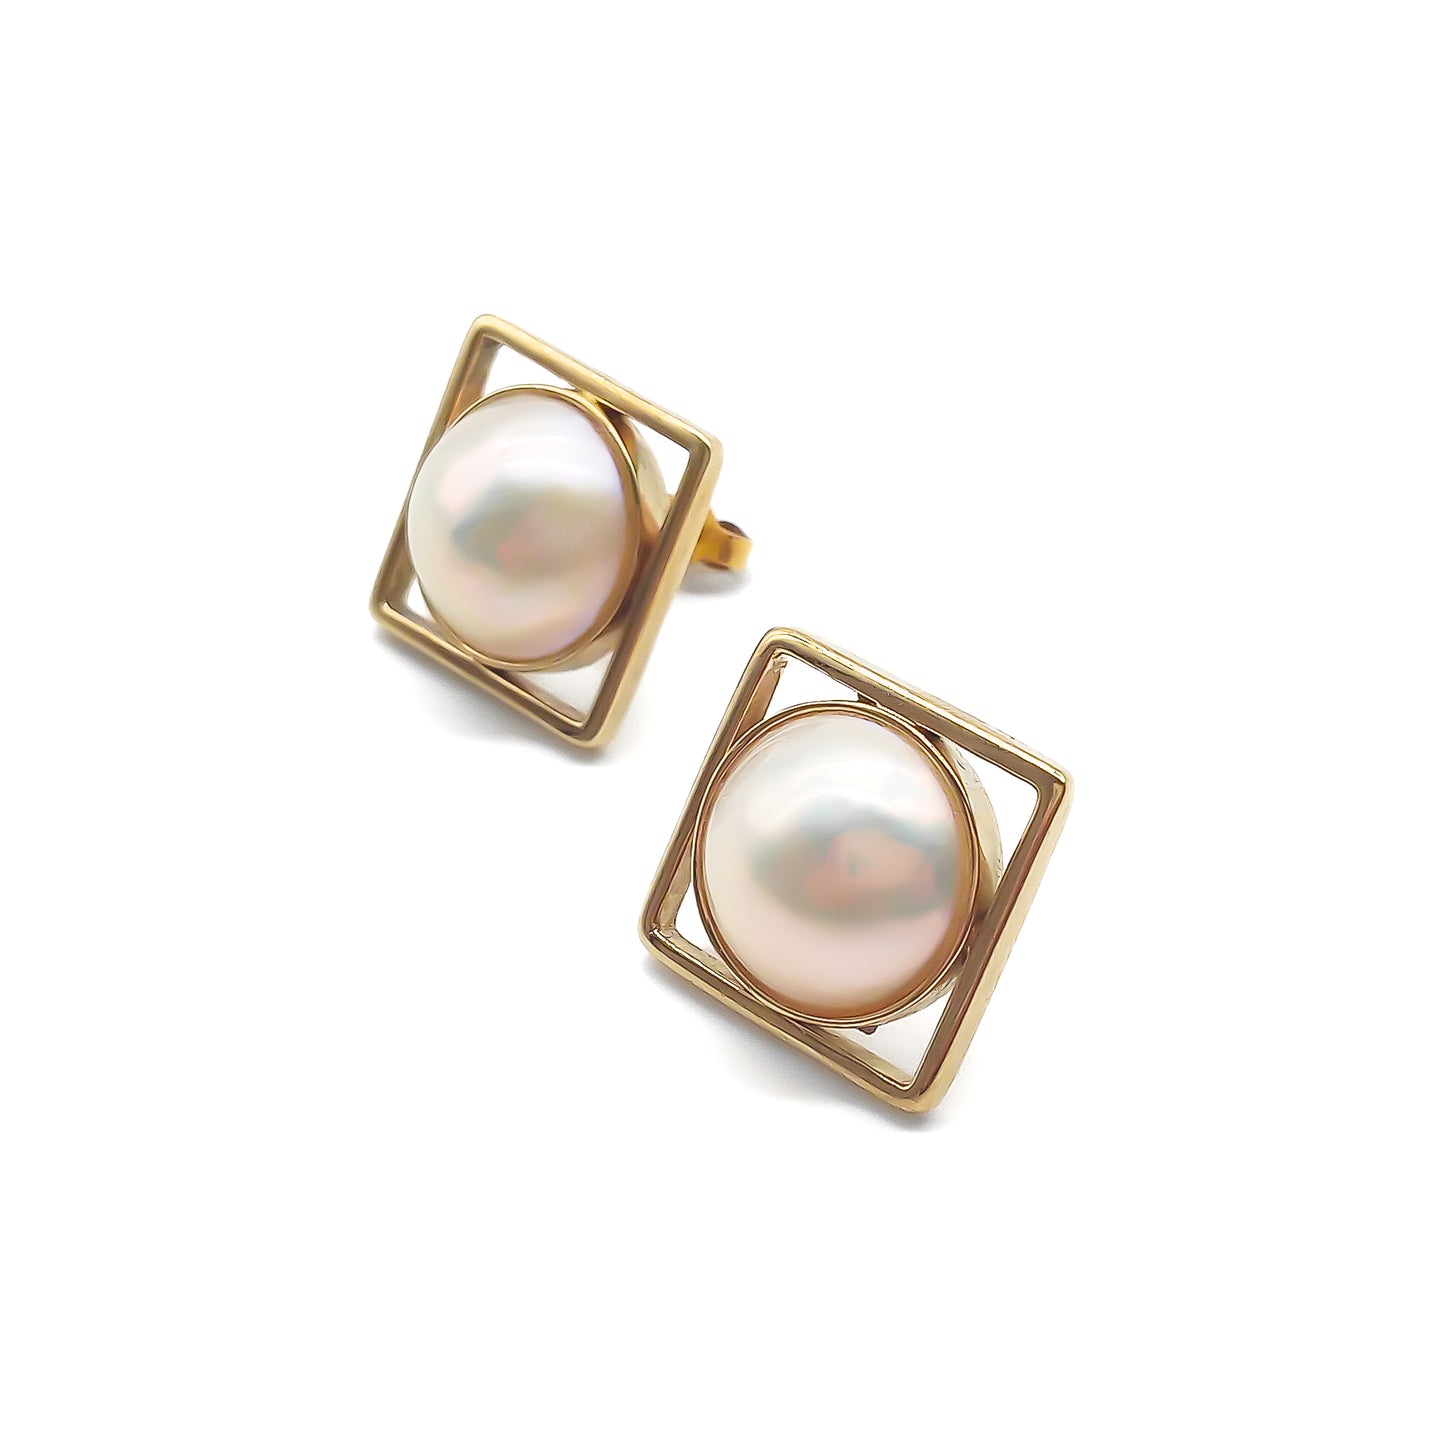 Classic 9ct gold stud earrings set with lustrous mabé pearls.